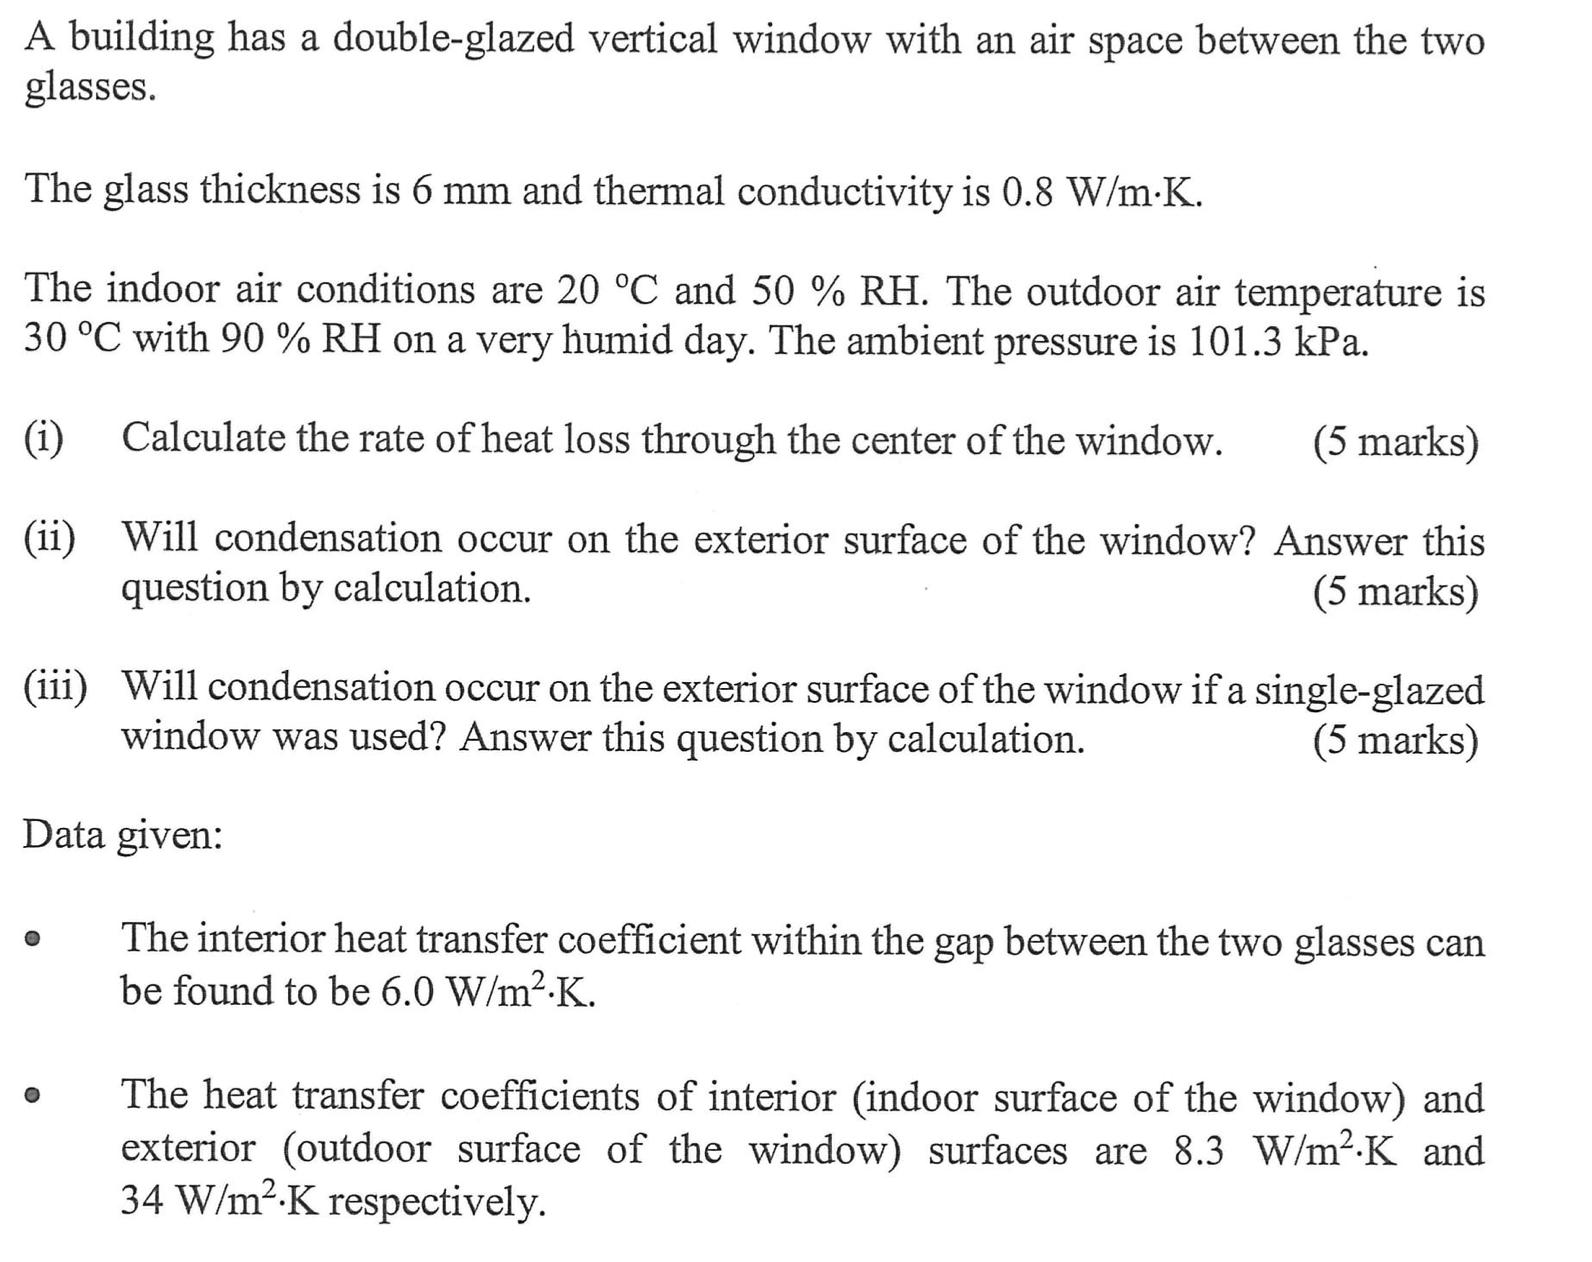 A building has a double-glazed vertical window with an air space between the two glasses. The glass thickness